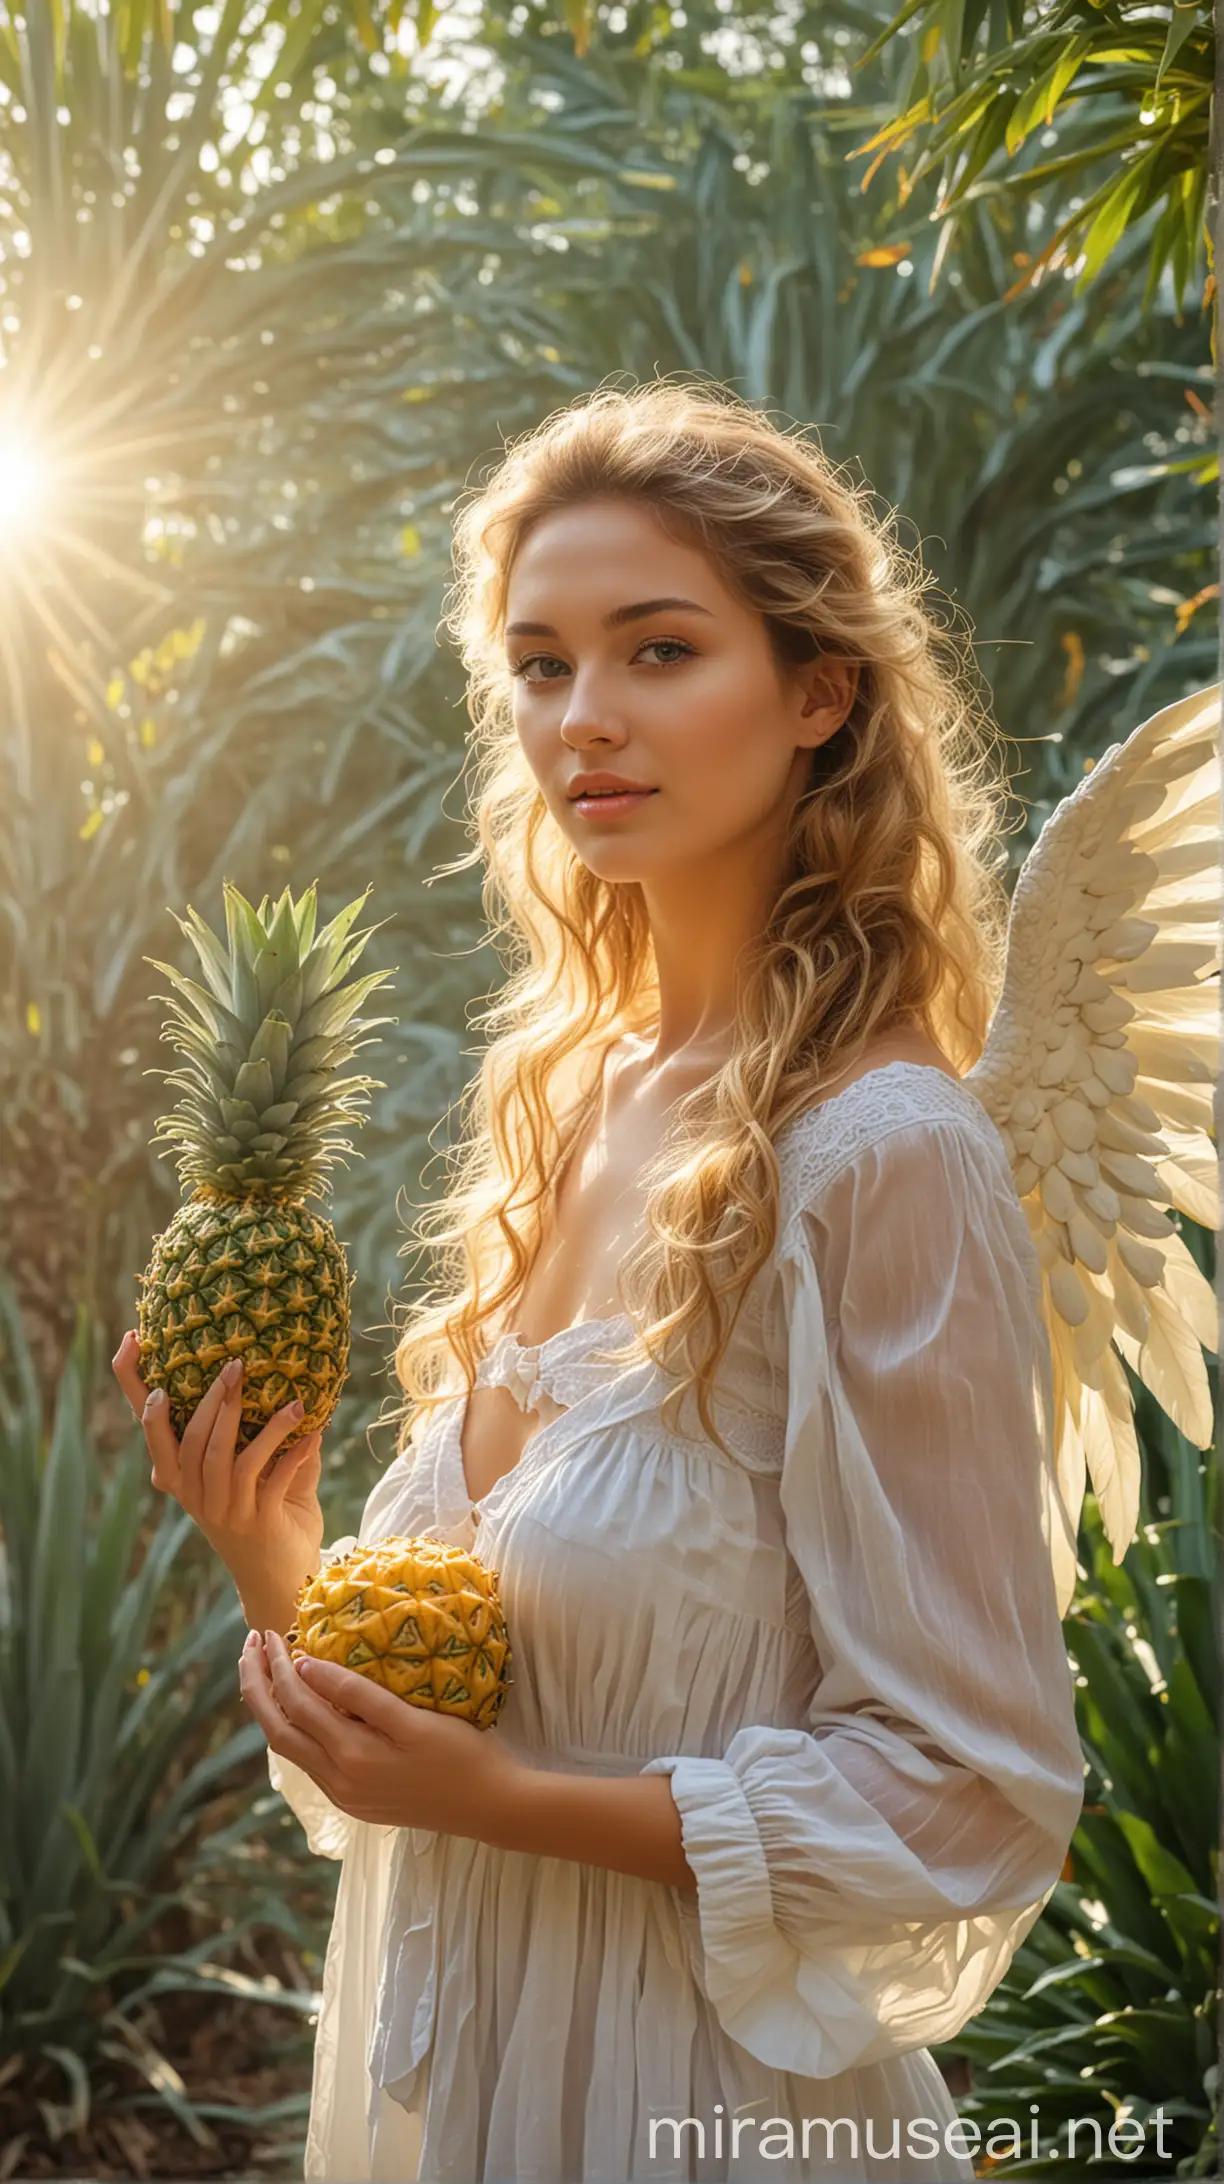 Beautiful Angel women and holding Pineapple on hand, natural background, sun light effect, 4k, HDR, morning time weather